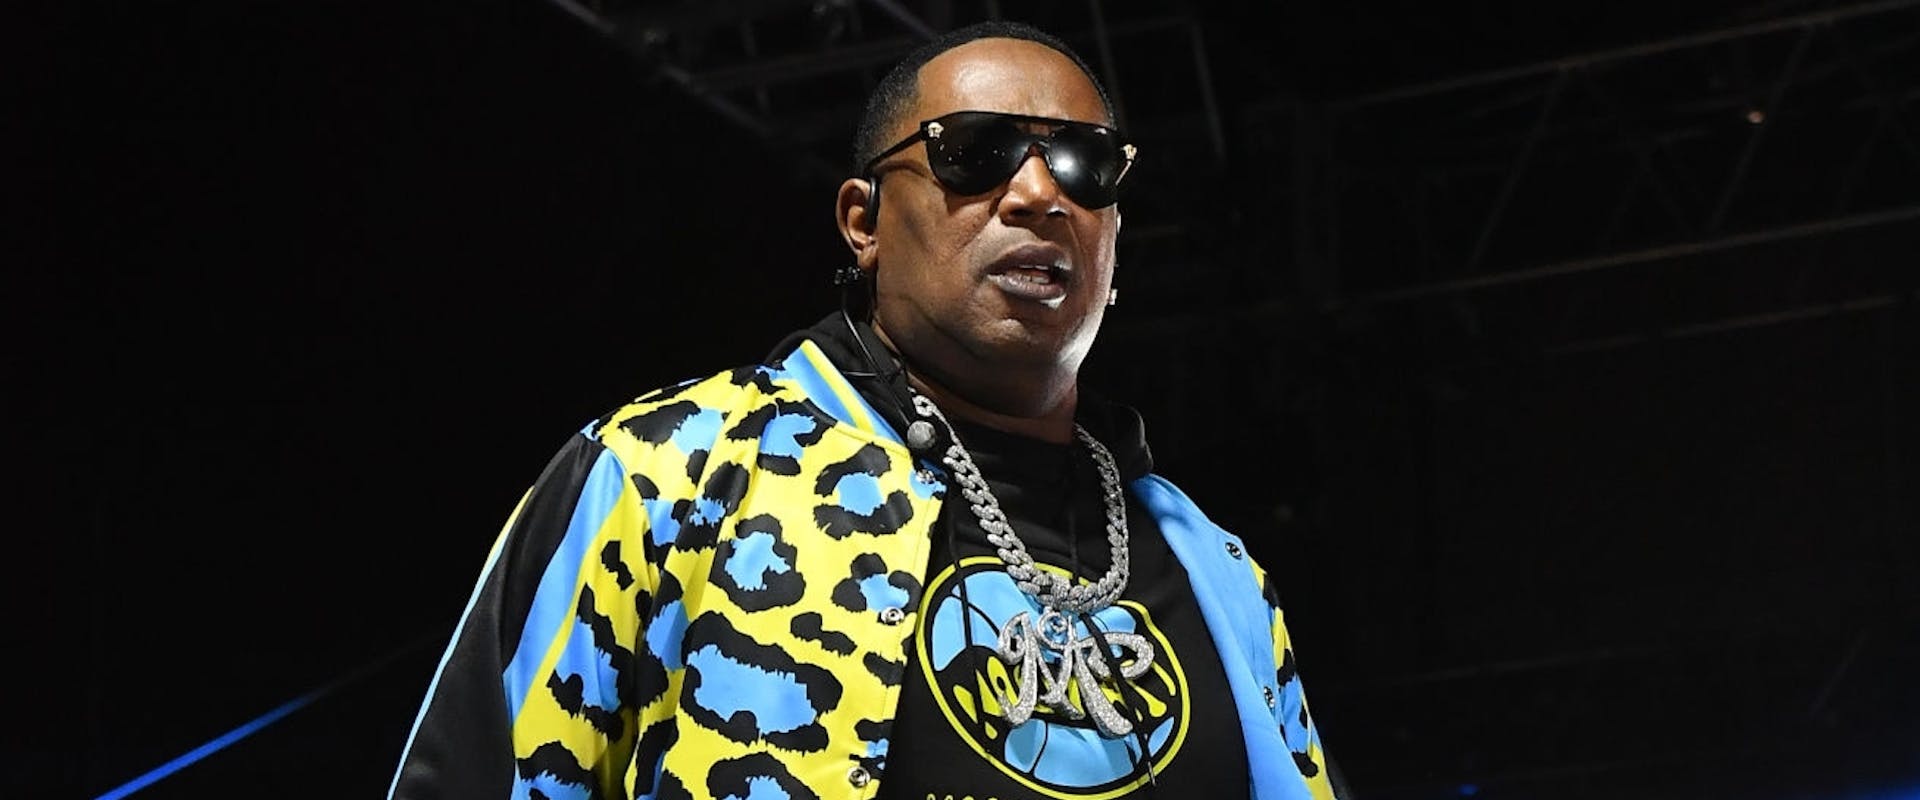 Rapper Master P performs onstage during his No Limit Reunion Tour at 2020 Funkfest at Legion Field on November 07, 2020 in Birmingham, Alabama.